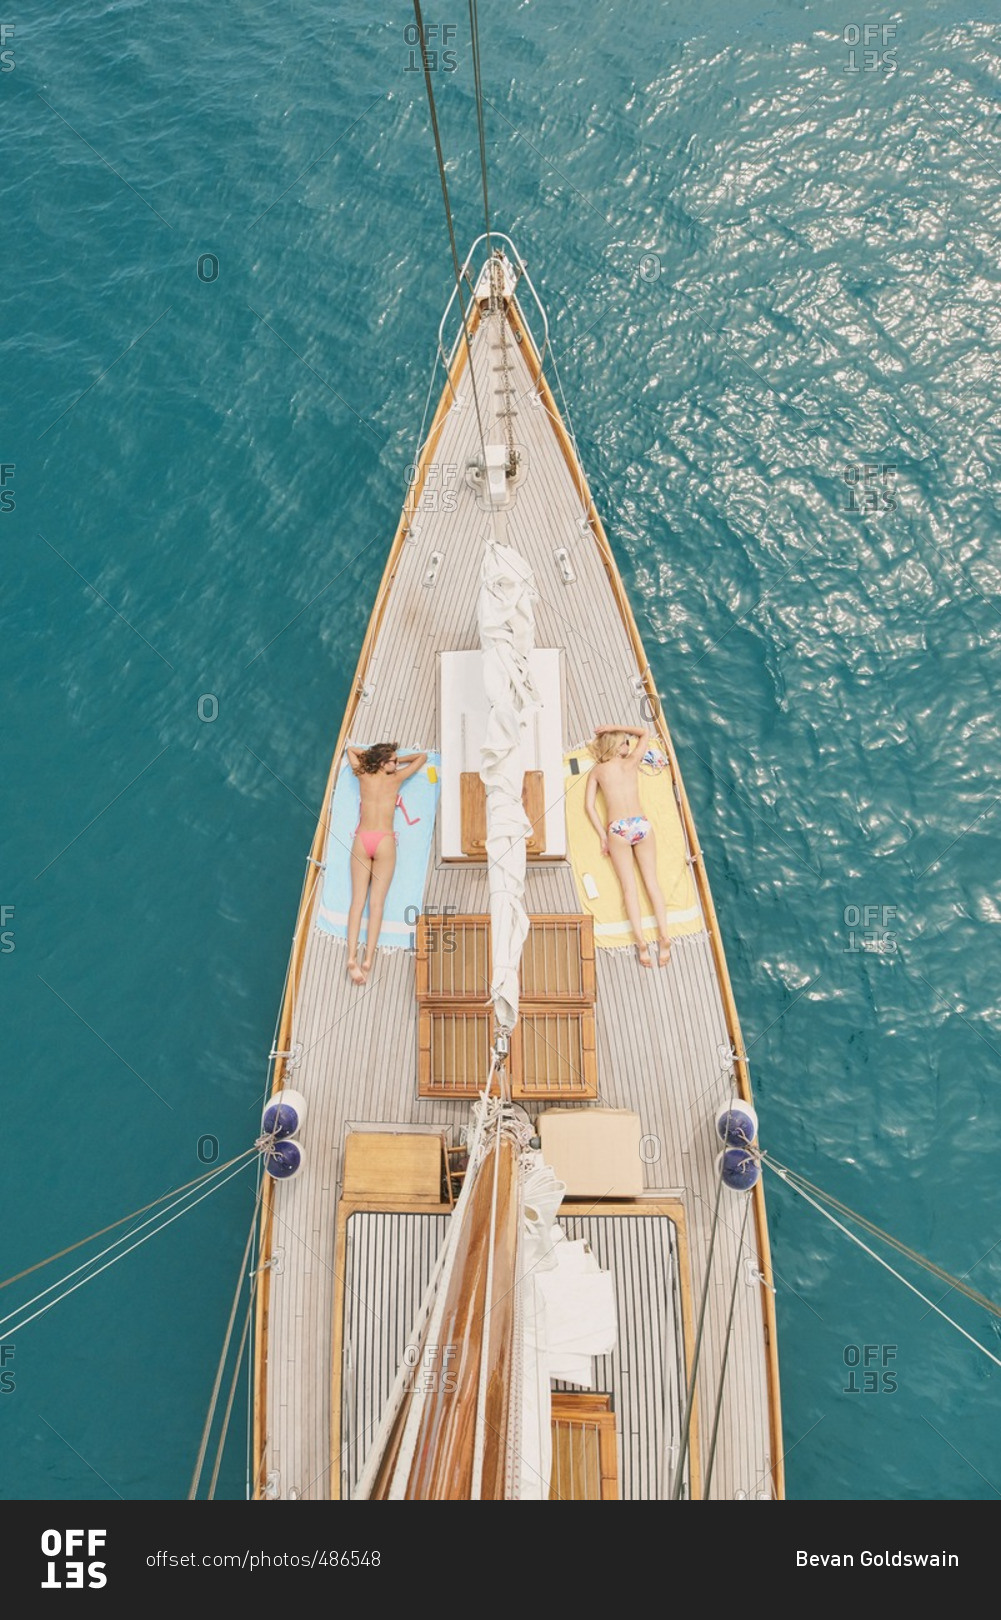 Beautiful girl friends tanning on sailboat in ocean from overhead